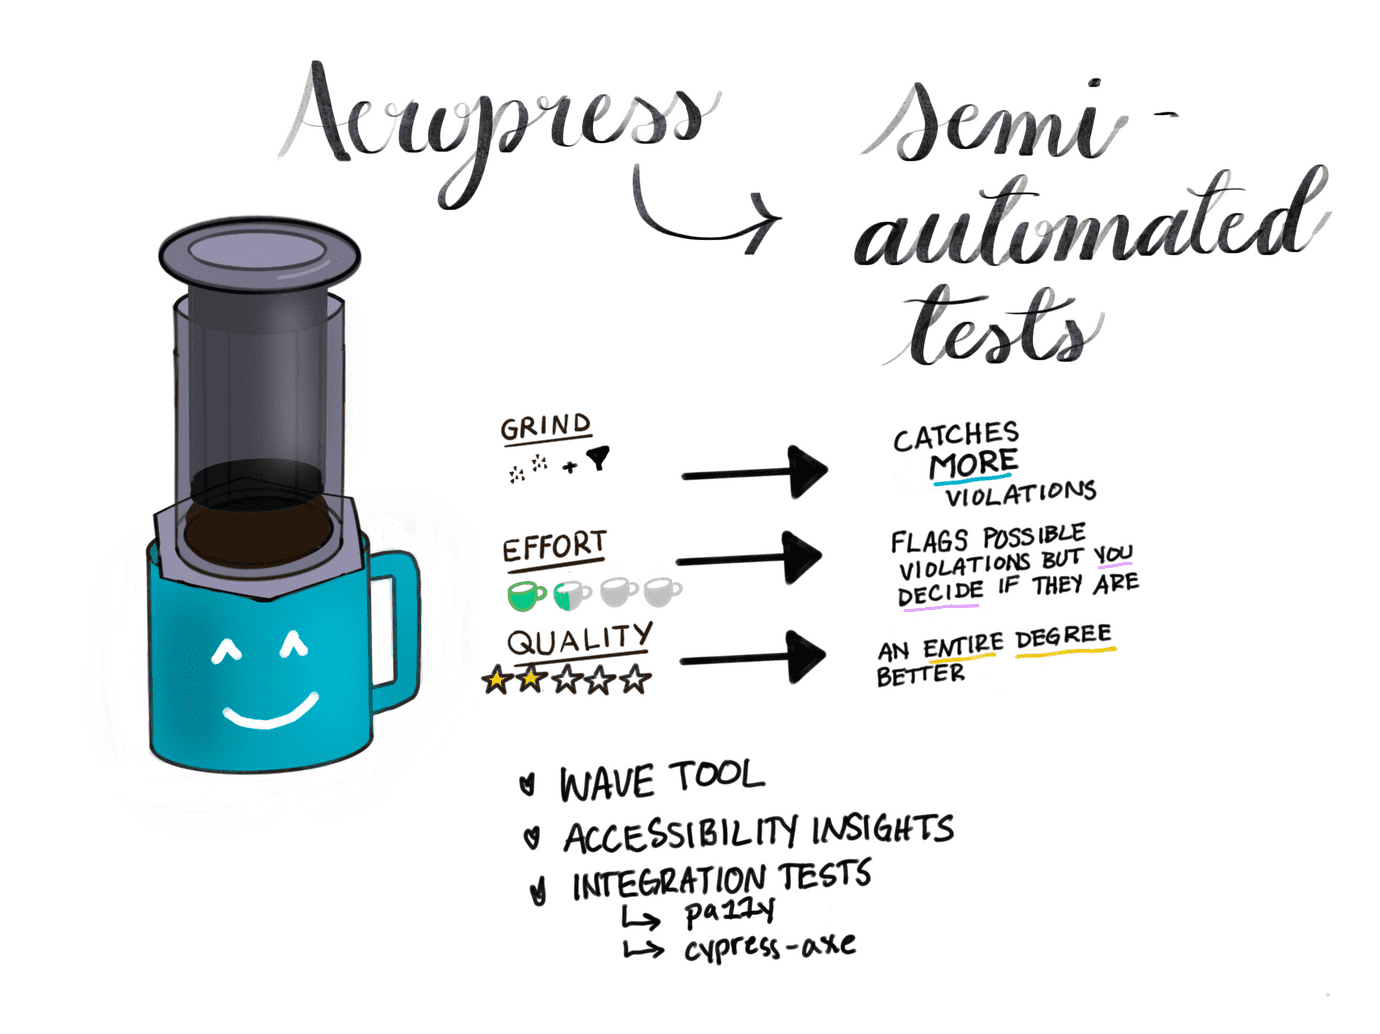 The Aeropress is **Semi-automated Accessibility Testing**